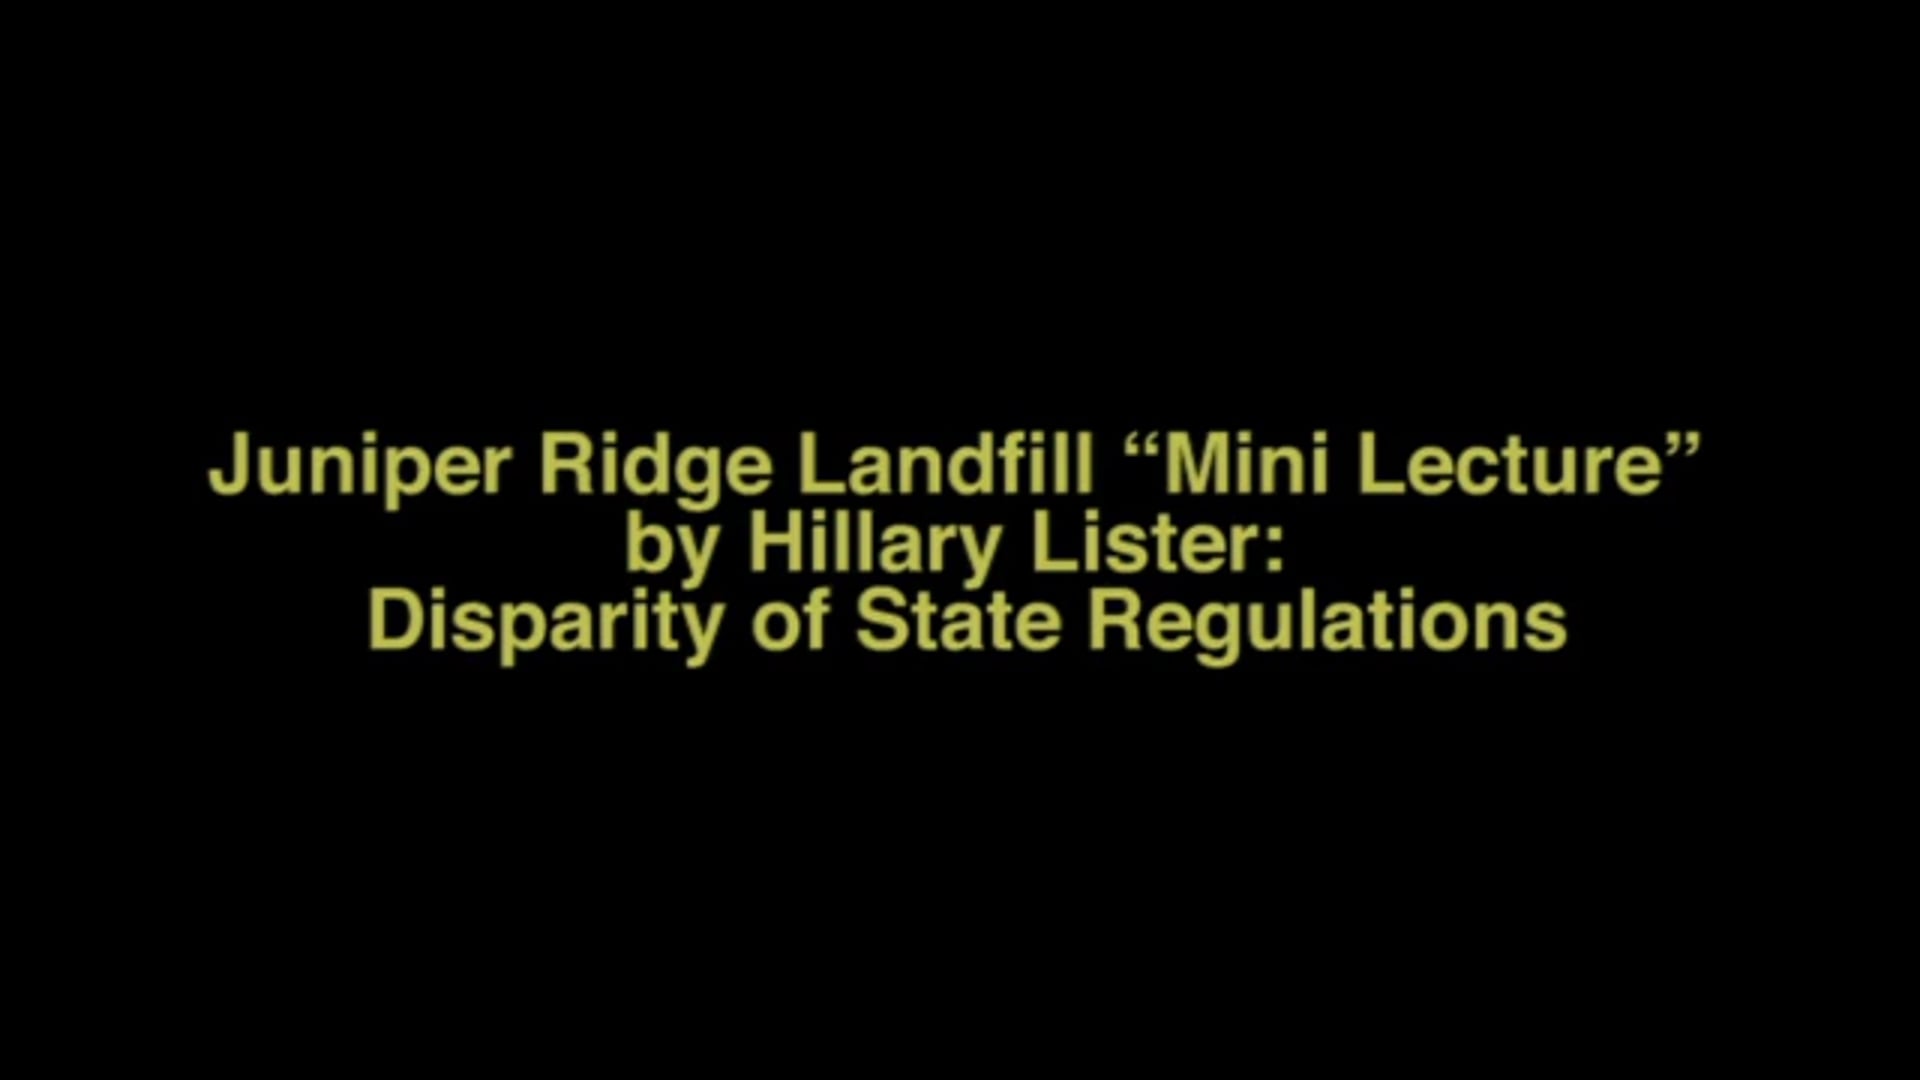 Disparity of State Regulations: Juniper Ridge Landfill Mini Lecture by Hillary Lister